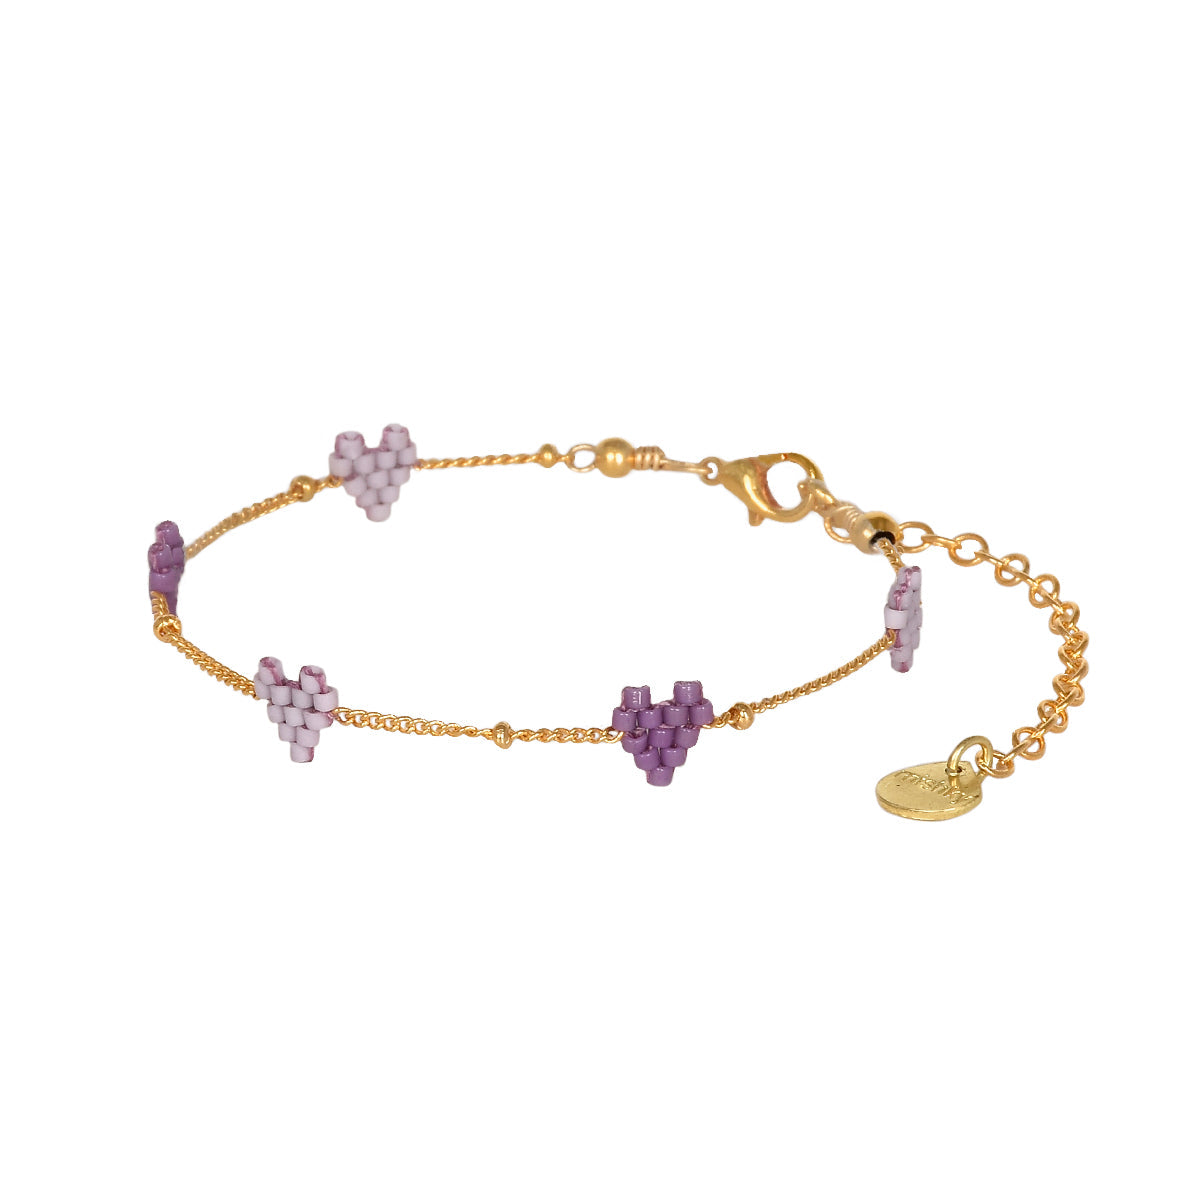 Heartsy Chain gold plated adjustable bracelet 12146